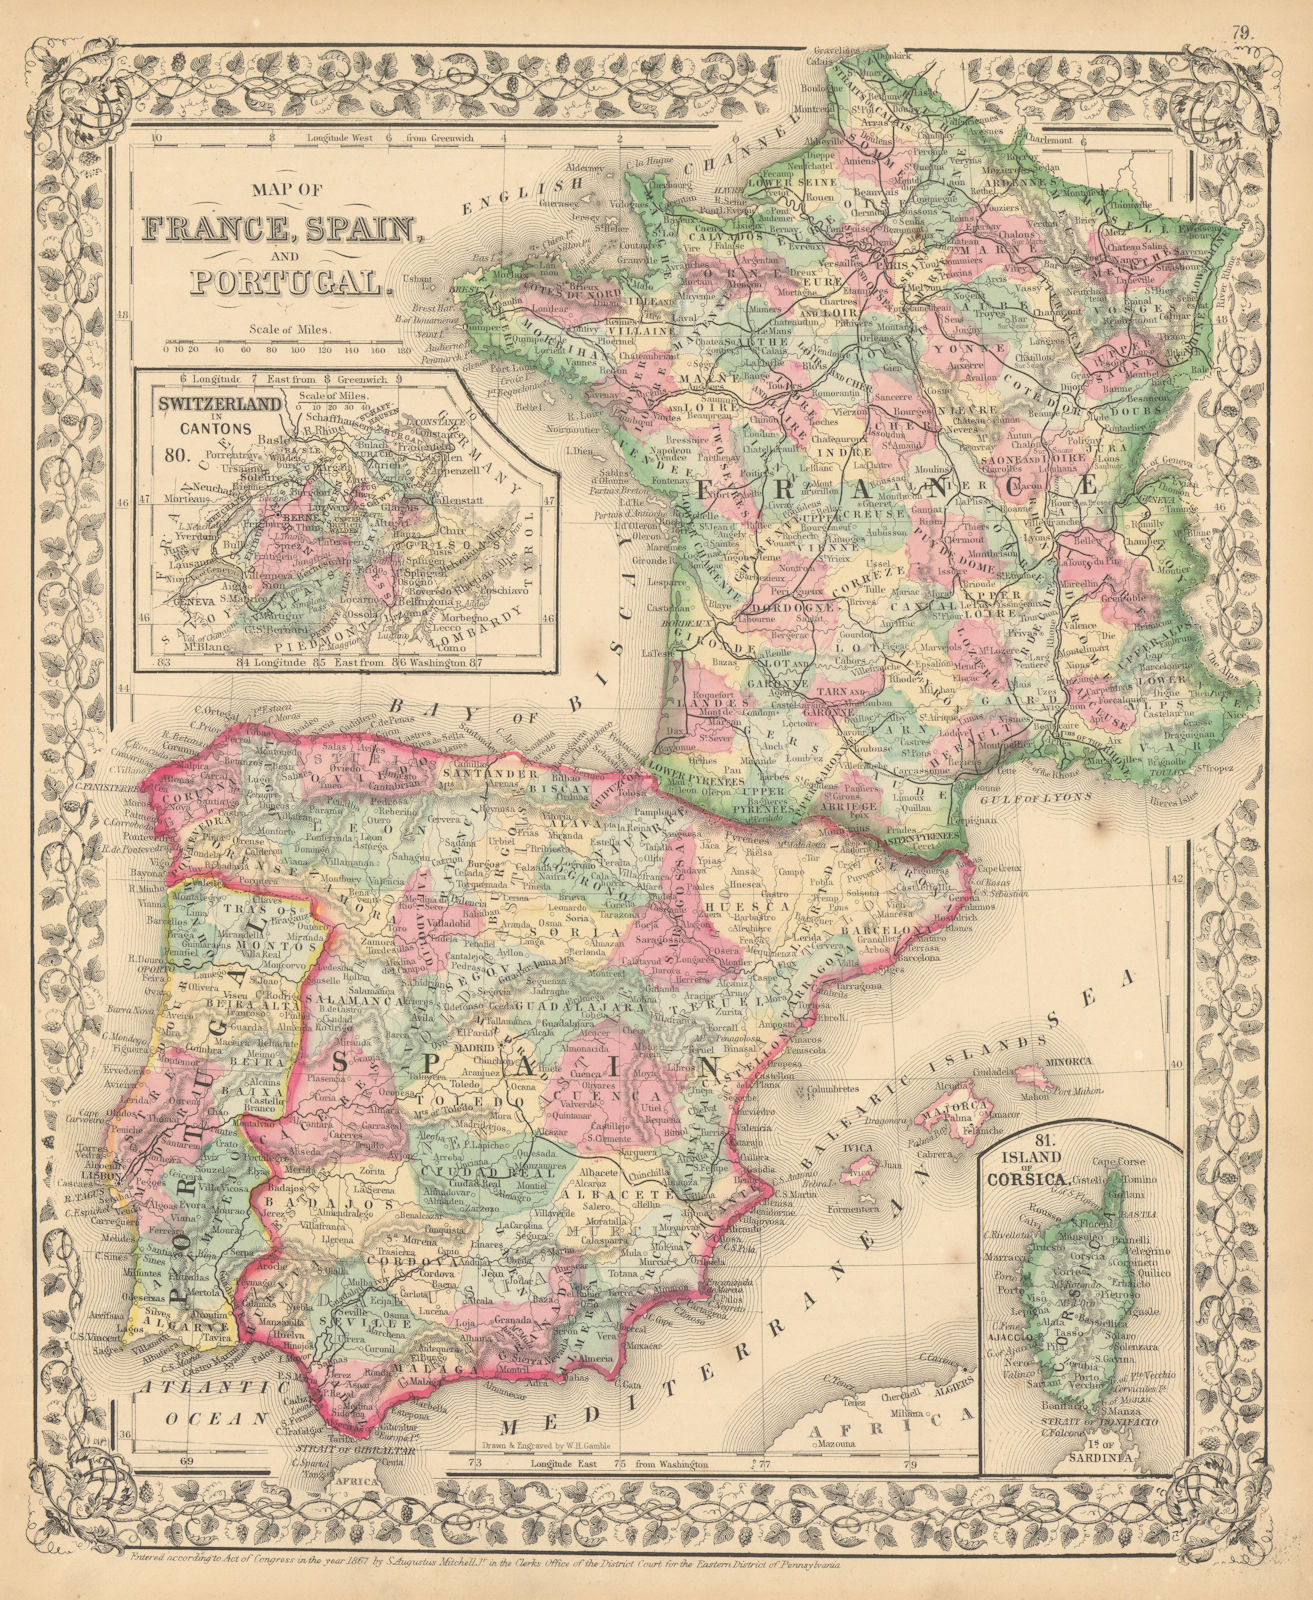 Associate Product Map of France, Spain, and Portugal. Switzerland in Cantons. MITCHELL 1869